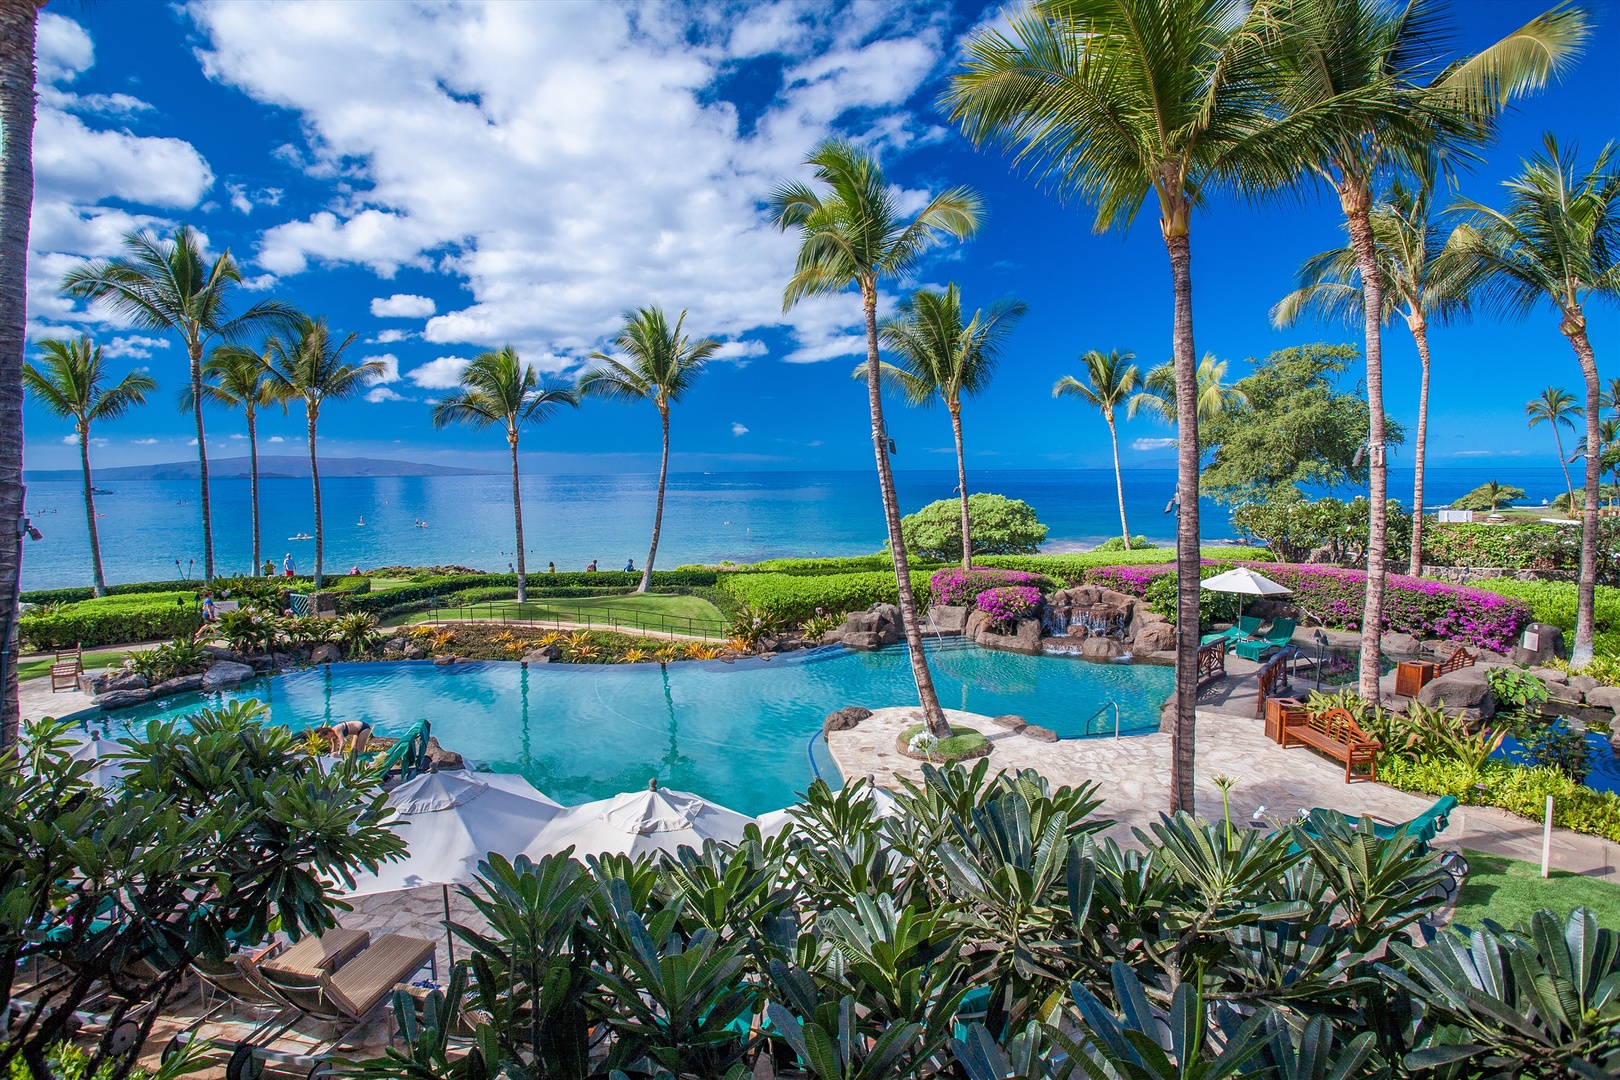 Wailea Vacation Rentals, Blue Ocean Suite H401 at Wailea Beach Villas* - Beach Front Adult Infinity-Edge Heated Swimming Pool set Directly on Wailea Beach - Private for guests of Wailea Beach Villas